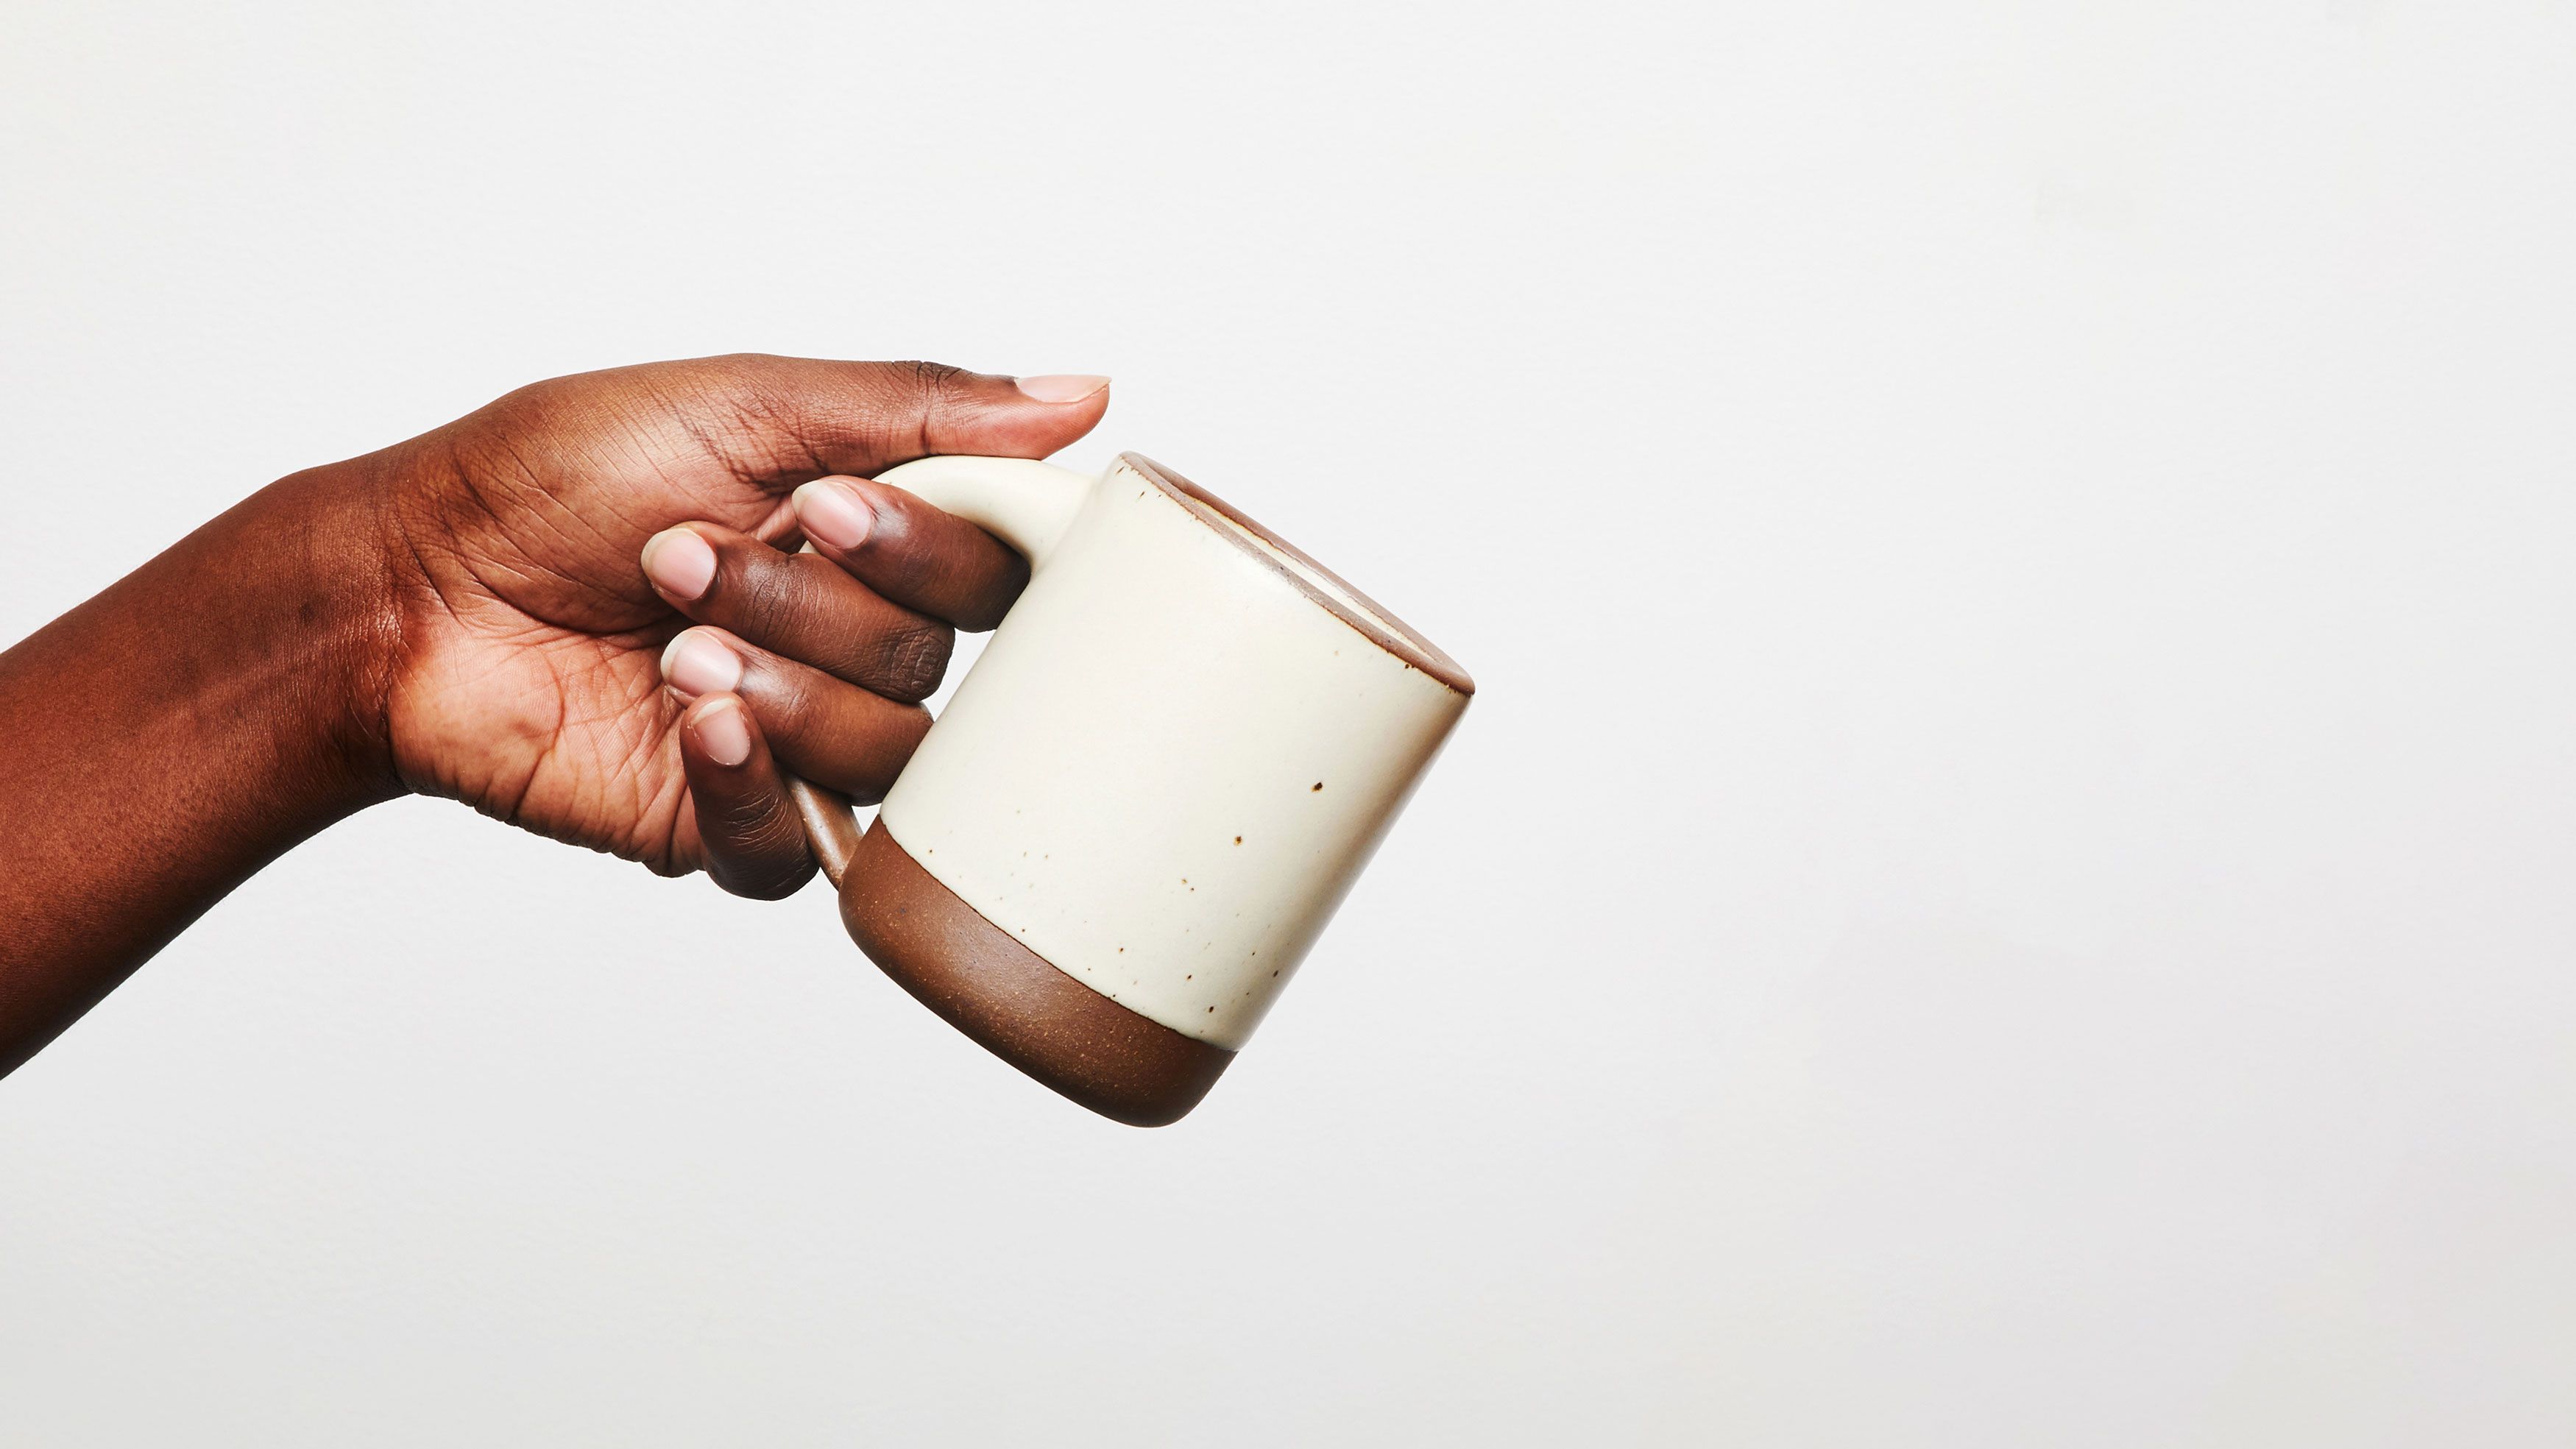 A hand holds an cool, white ceramic mug with a raw clay rim, with three fingers fitting effortlessly through the mugs handle